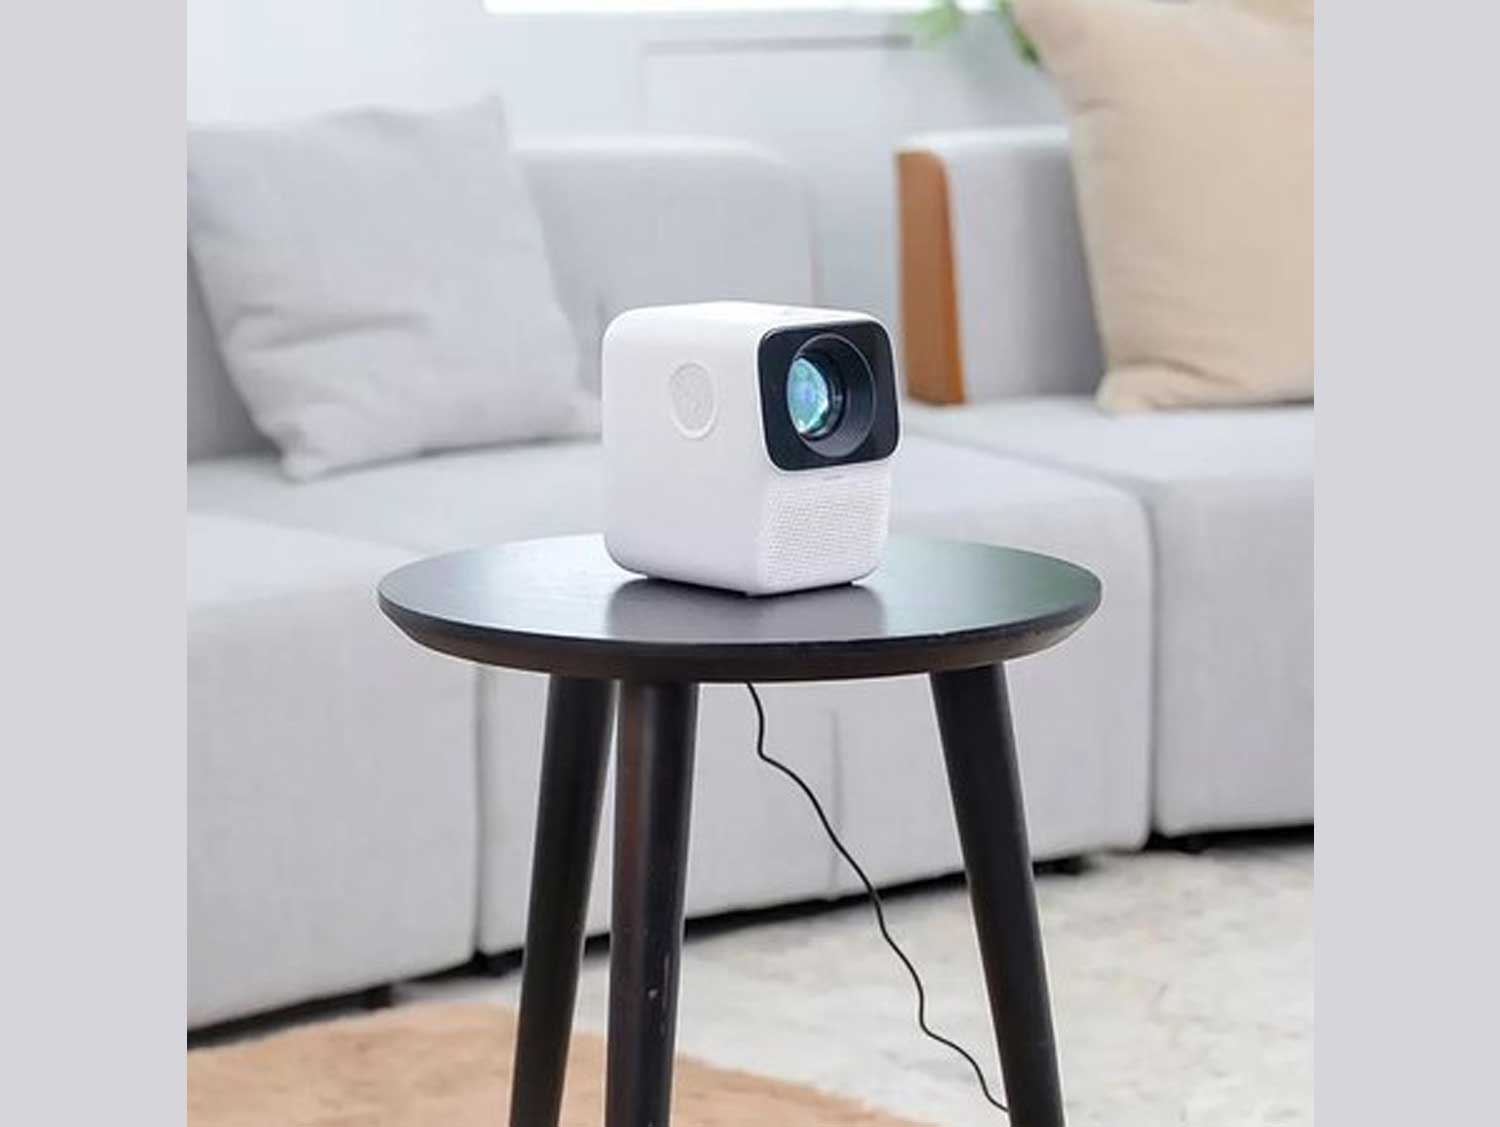 Wanbo Portable T2 Free Projector